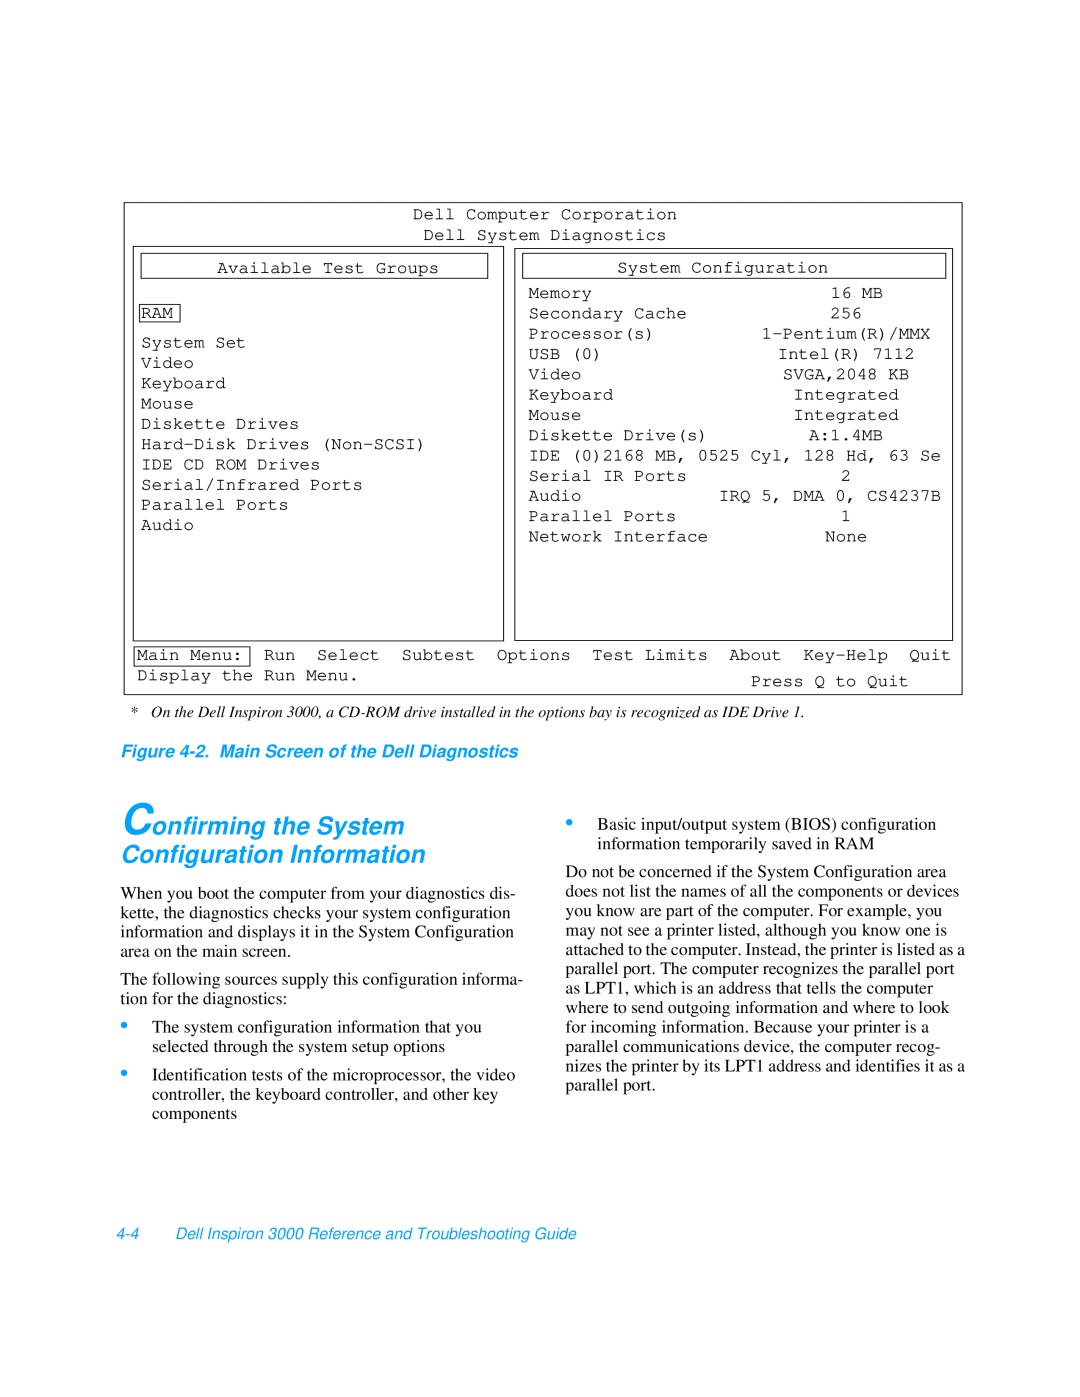 Dell 3000 manual Confirming the System Configuration Information, 2. Main Screen of the Dell Diagnostics 